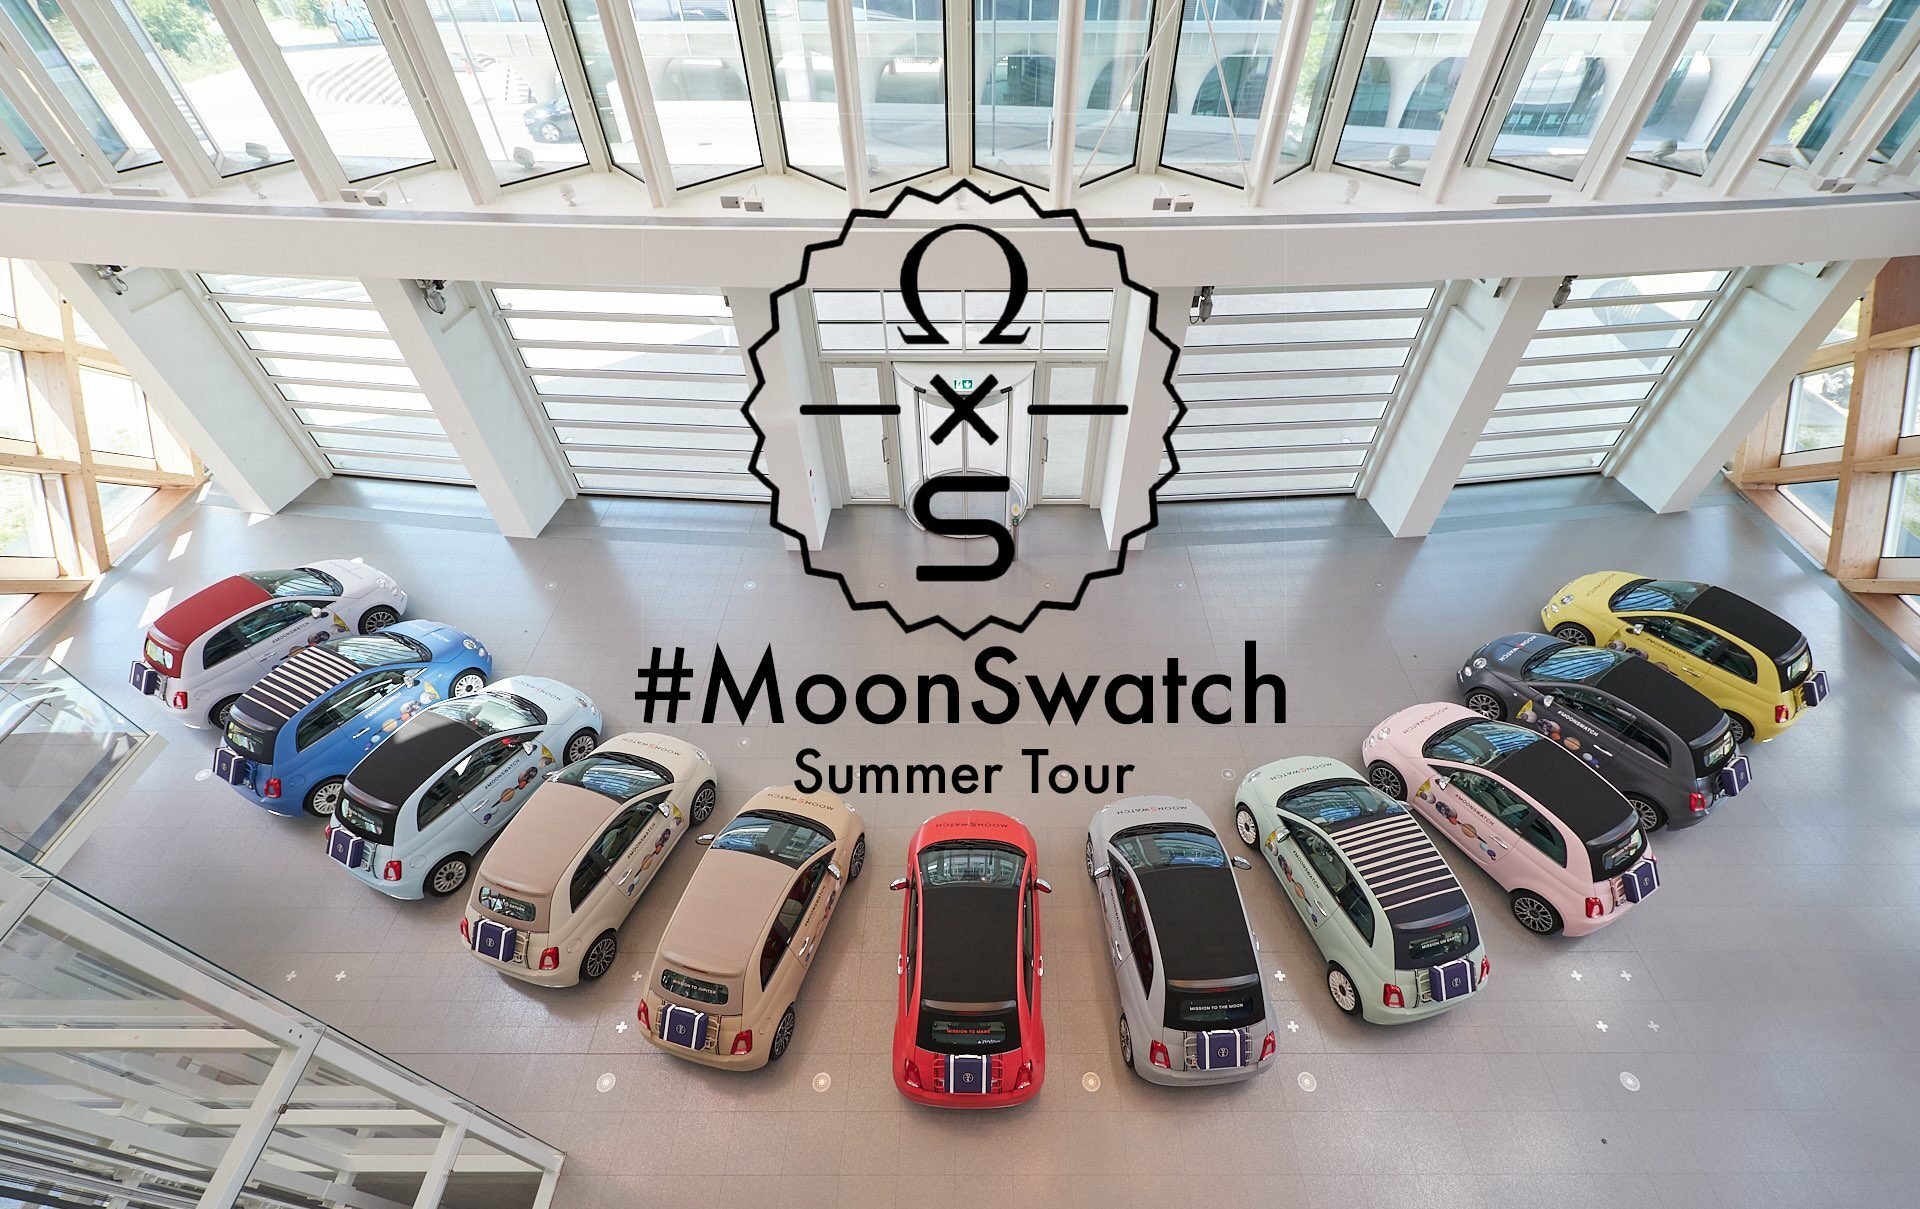 Swatch Group CEO dashes hopes that MoonSwatch will be sold online